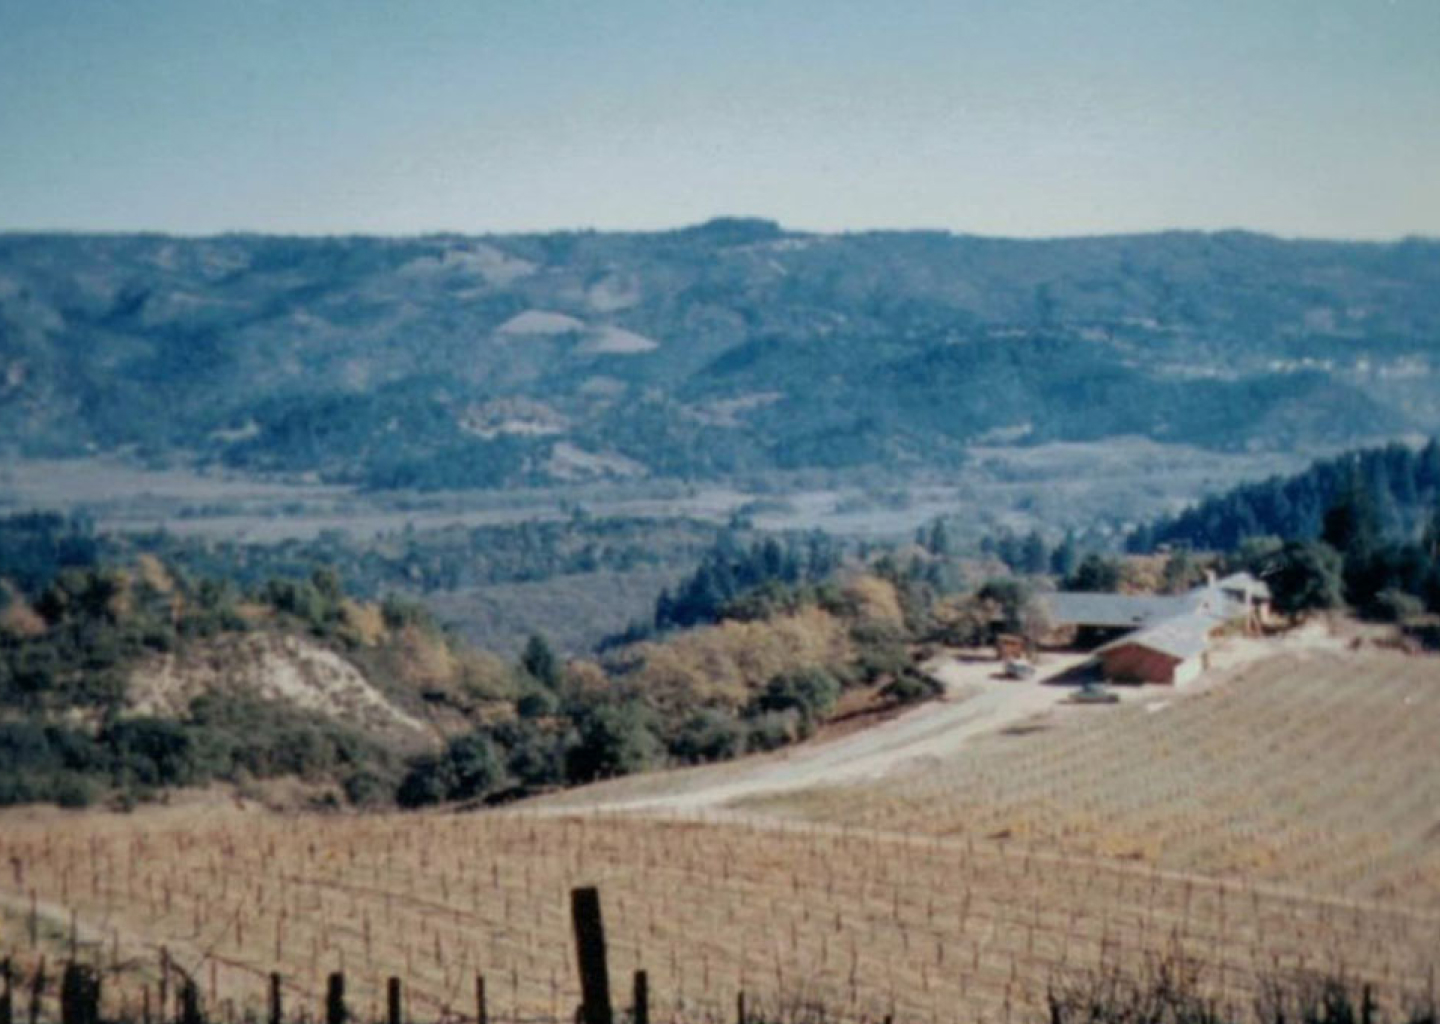 An image of Stony Hill vineyard from the 1970's, showing the vineyards being planted and overlooking Napa Valley.